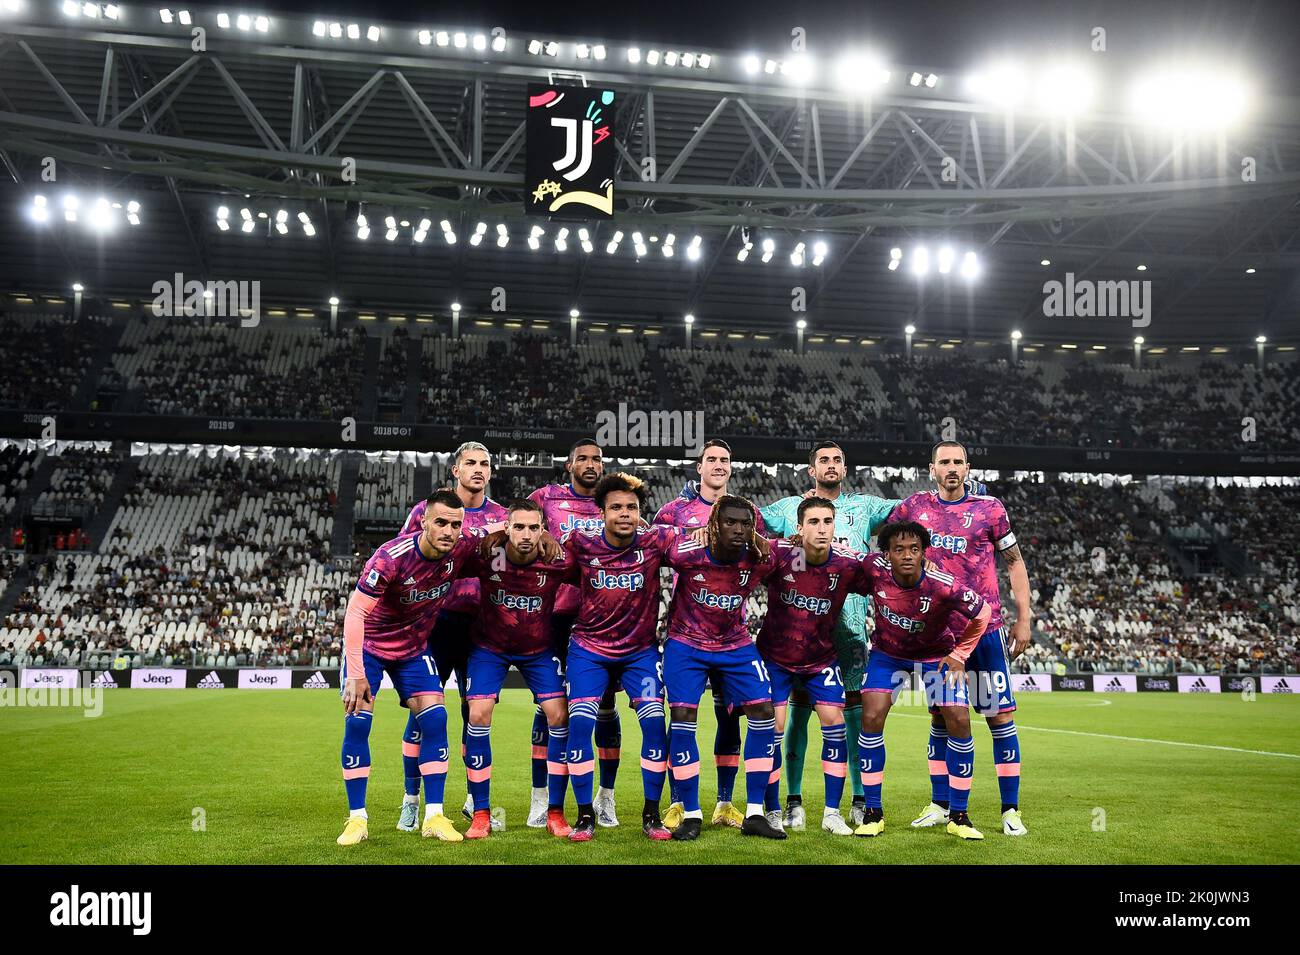 Turin, Italy. 11 September 2022. Players of Juventus FC pose for a team photo prior to the Serie A football match between Juventus FC and US Salernitana. Credit: Nicolò Campo/Alamy Live News Stock Photo